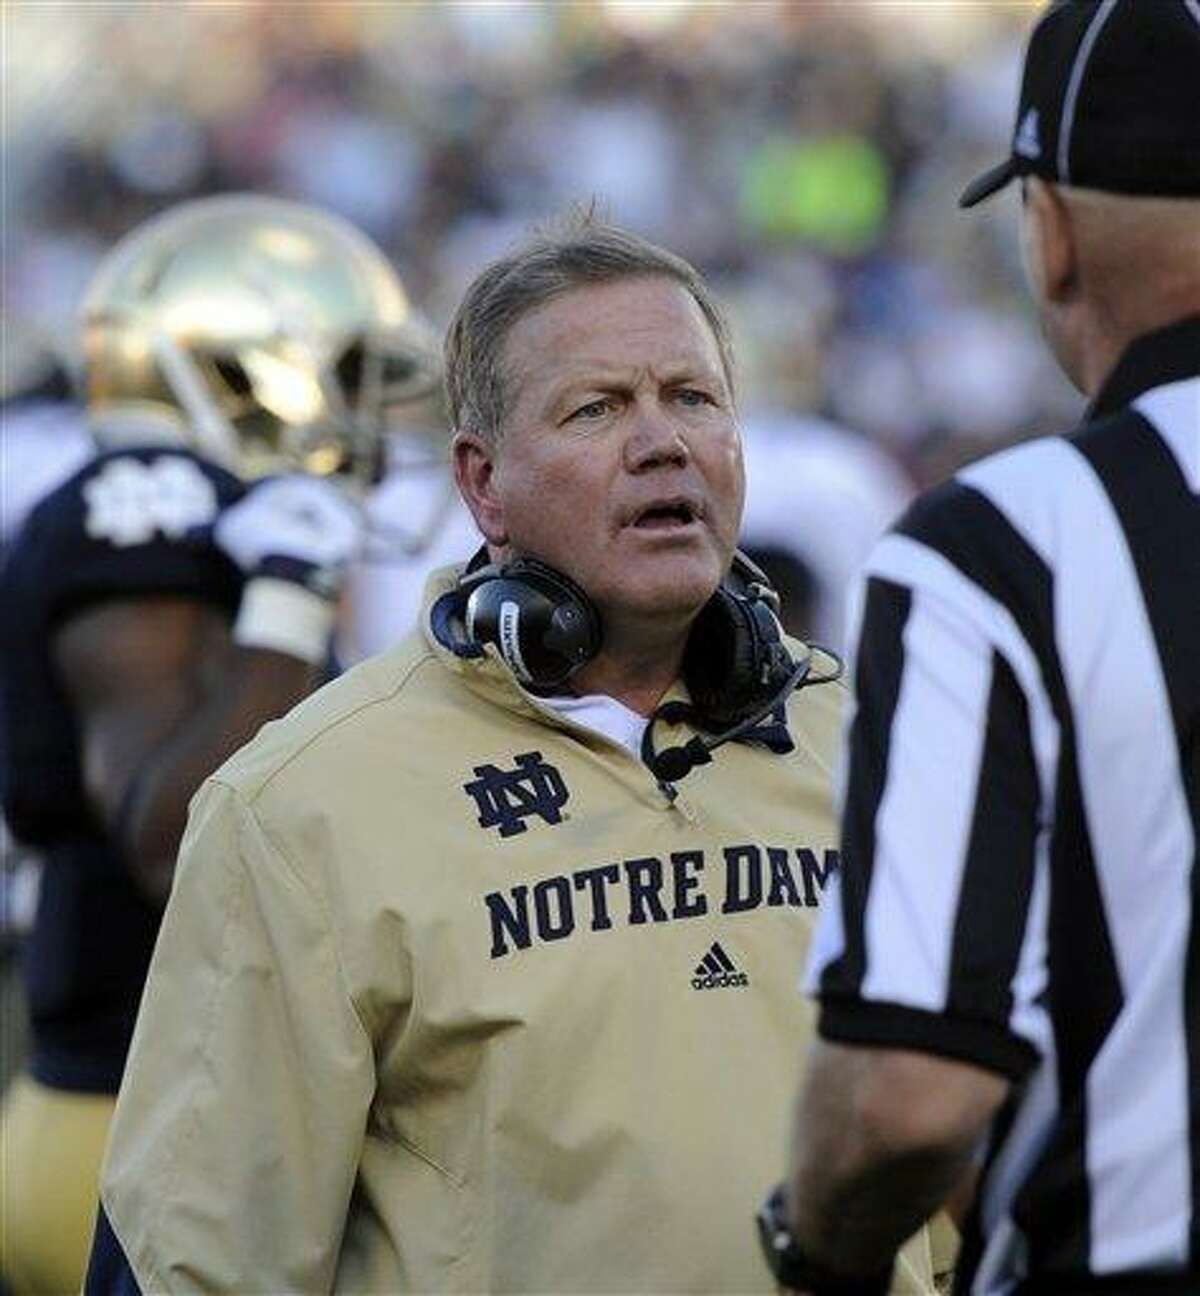 College football: Notre Dame will continue to churn out NFL